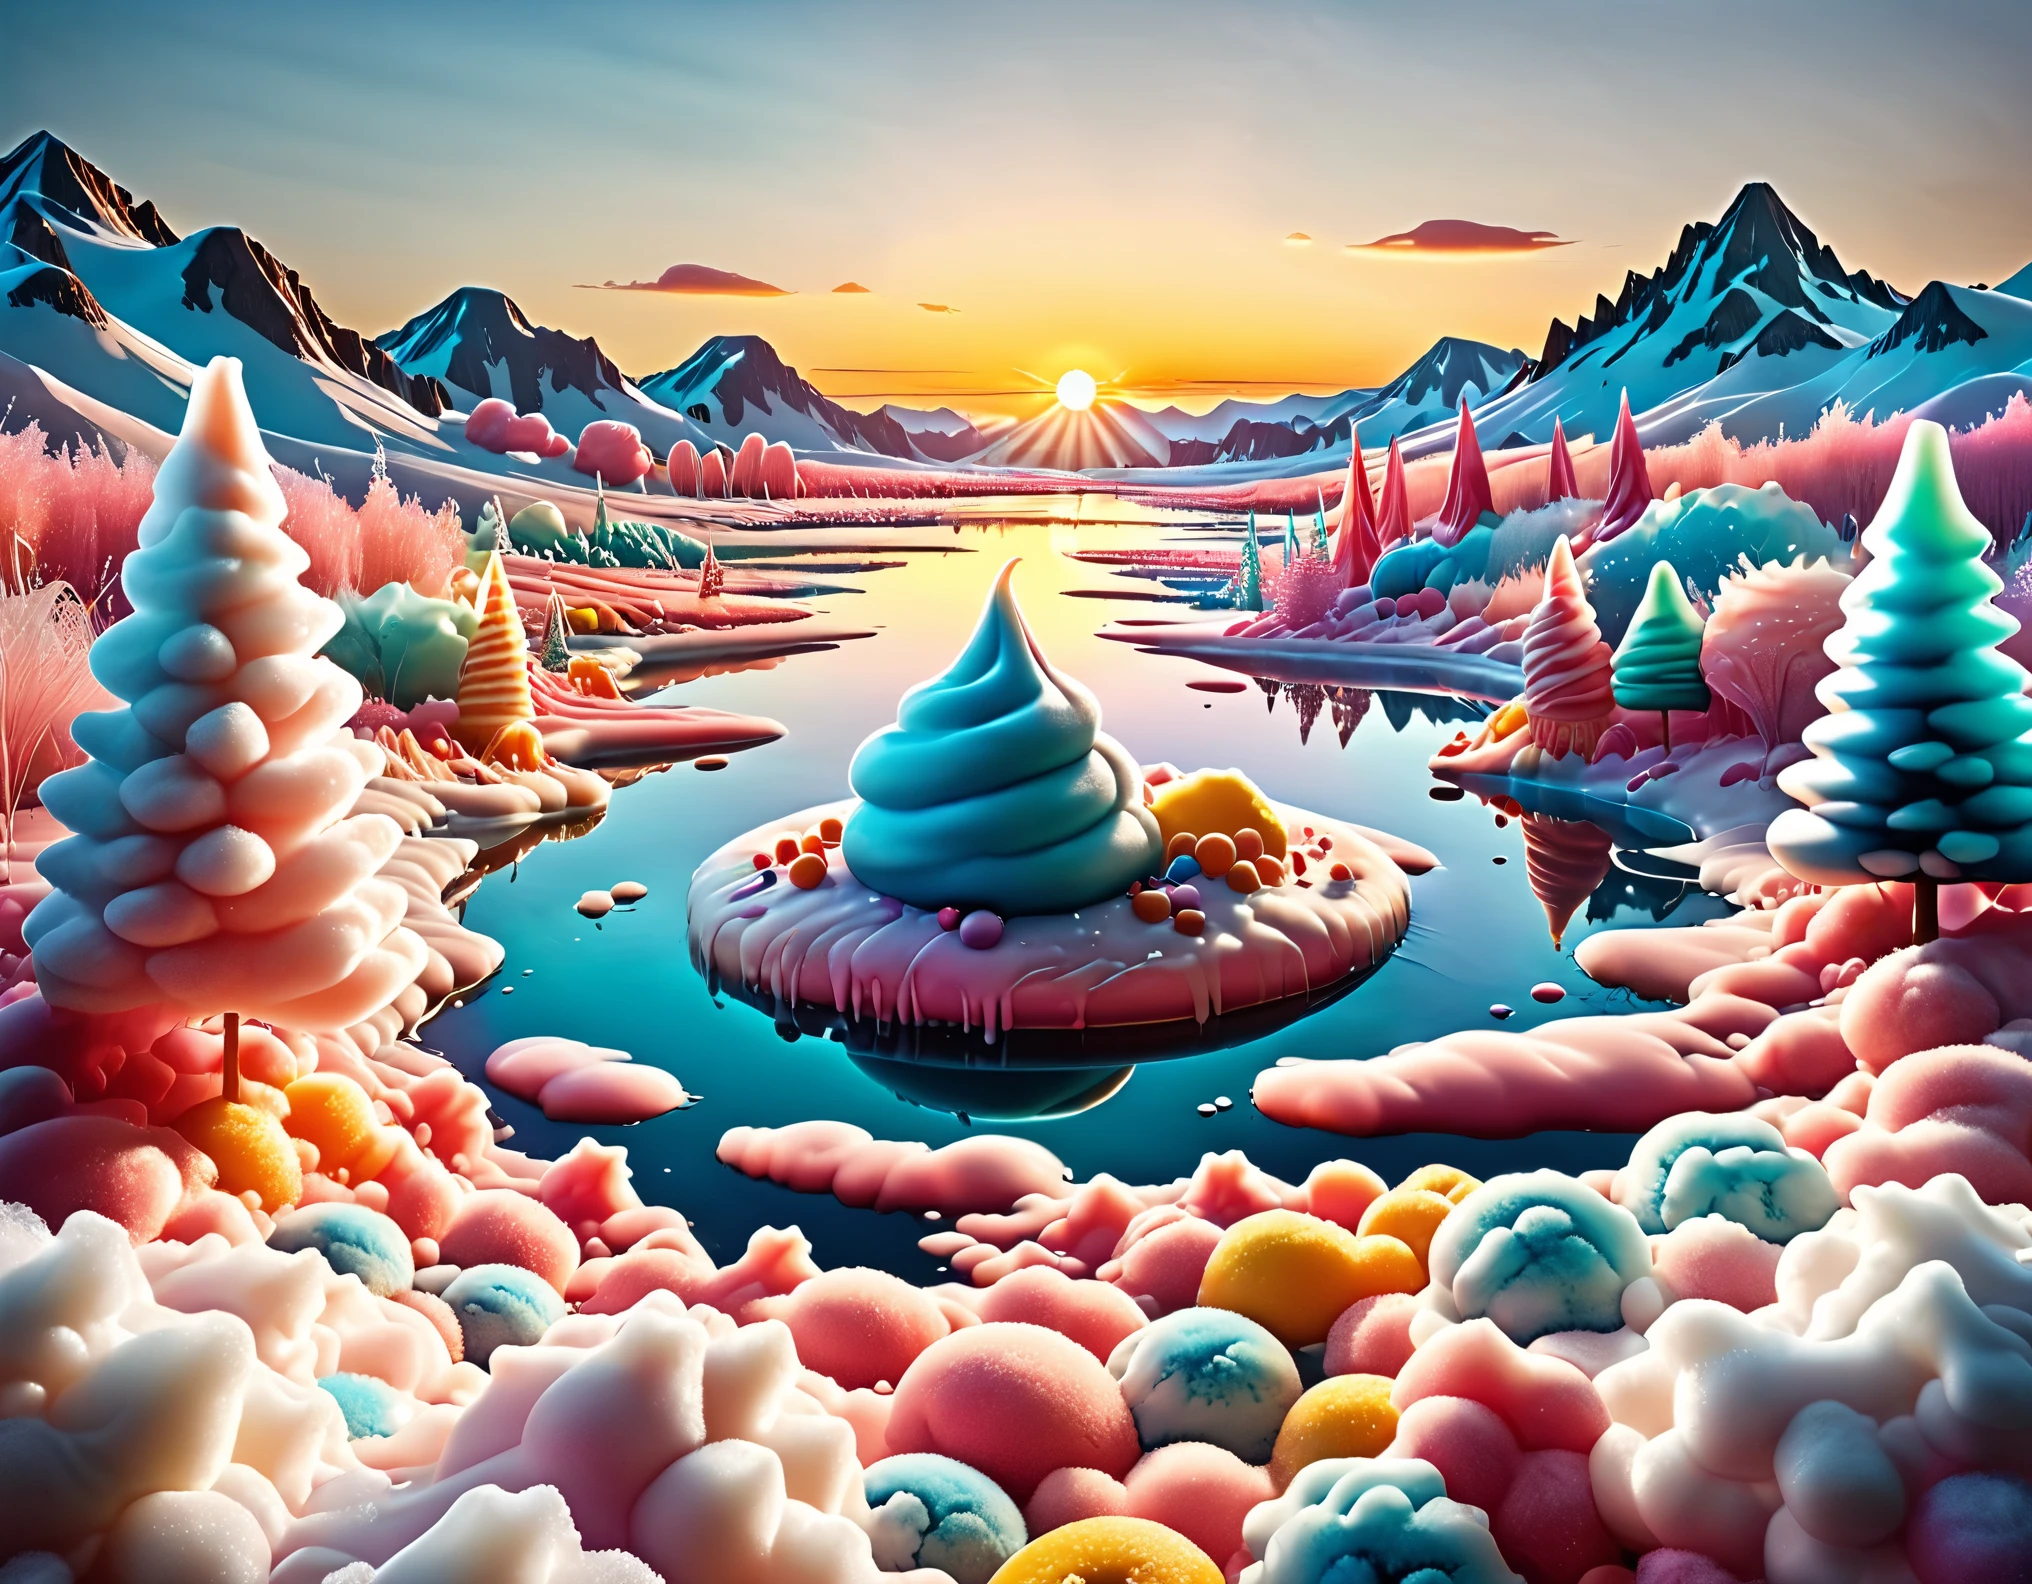 ((beautiful candy planet, floating in gelatin, you can see popsicle trees, rivers of icing, mountains of cakes, epic: 1.7)), long shot: 1.4, (masterpiece: 1.5), (Best quality: 1.6), (ultra high resolution:1.4), ((landscape, vibrant colors, sunrise, donut-shaped sun:1.7)), (( magical, Beautiful, dreamy idyllic:1.6 )), (( Best quality, vibrant, 32k, clear and well-defined shadows, sharpness in the image: 1.6)).